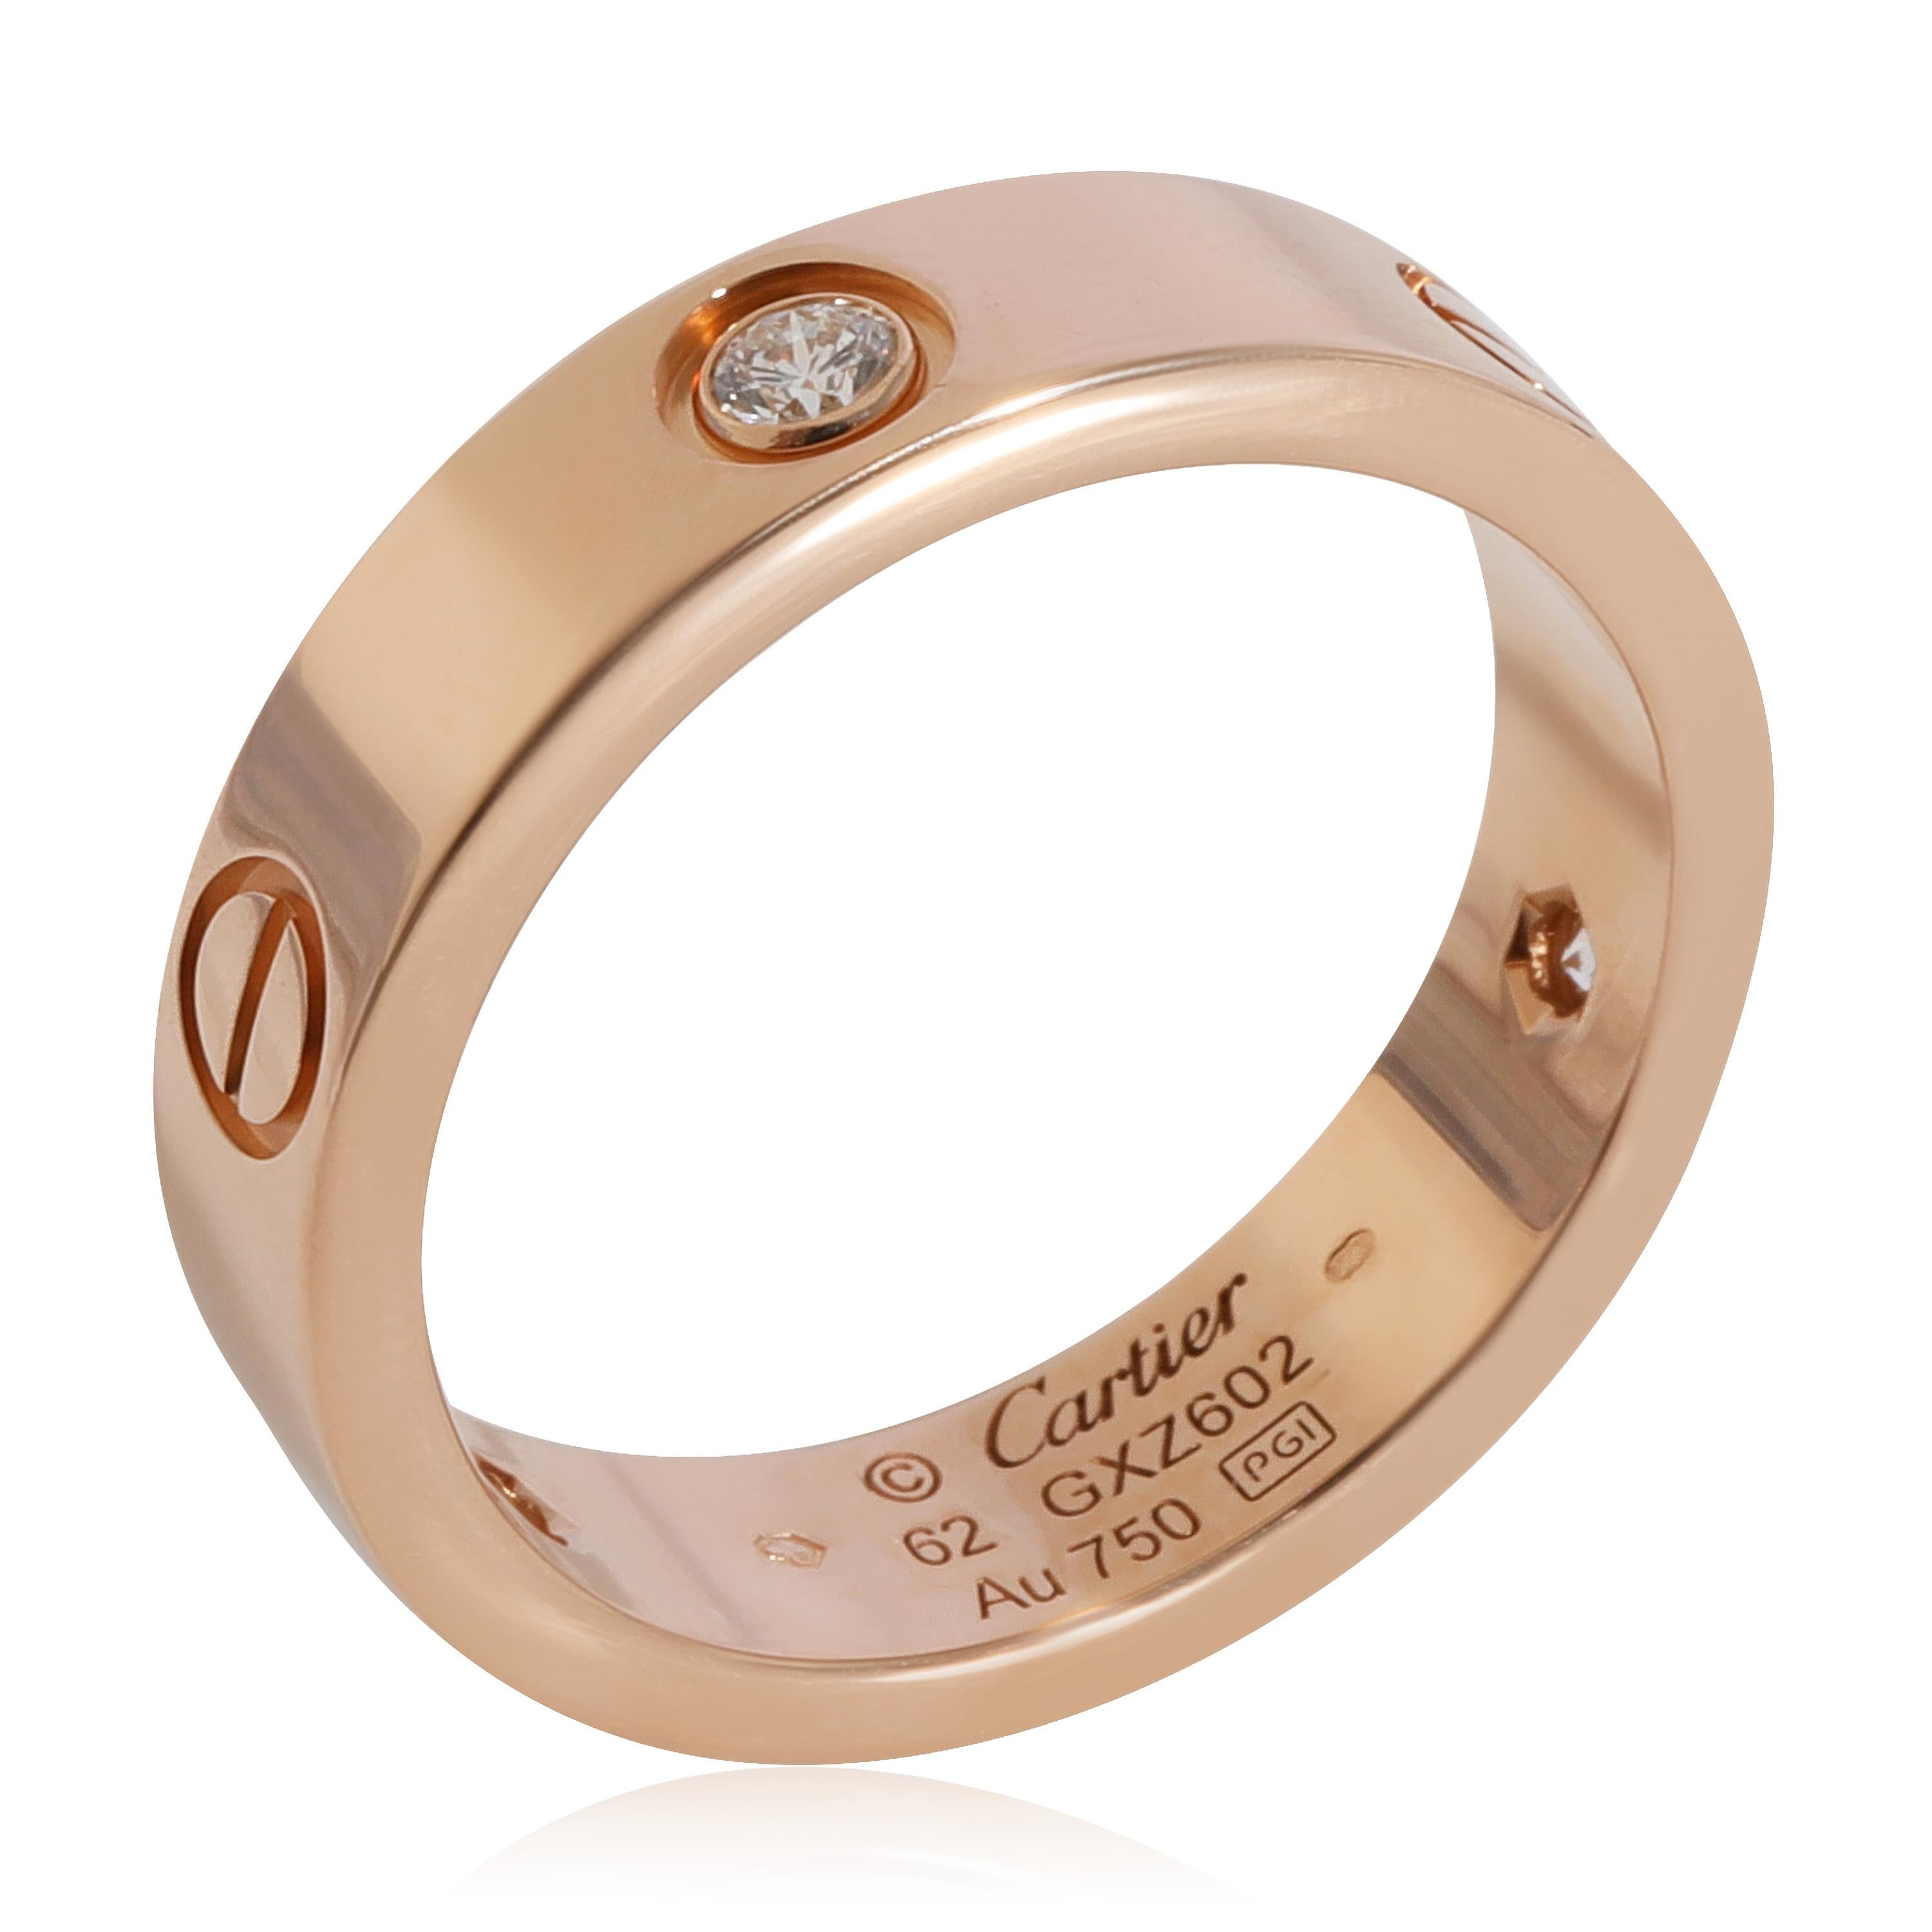 Cartier Love Diamond Ring in 18k Rose Gold 0.22 CTW

PRIMARY DETAILS
SKU: 124777
Listing Title: Cartier Love Diamond Ring in 18k Rose Gold 0.22 CTW
Condition Description: Retails for 3850 USD. In excellent condition and recently polished. Ring size